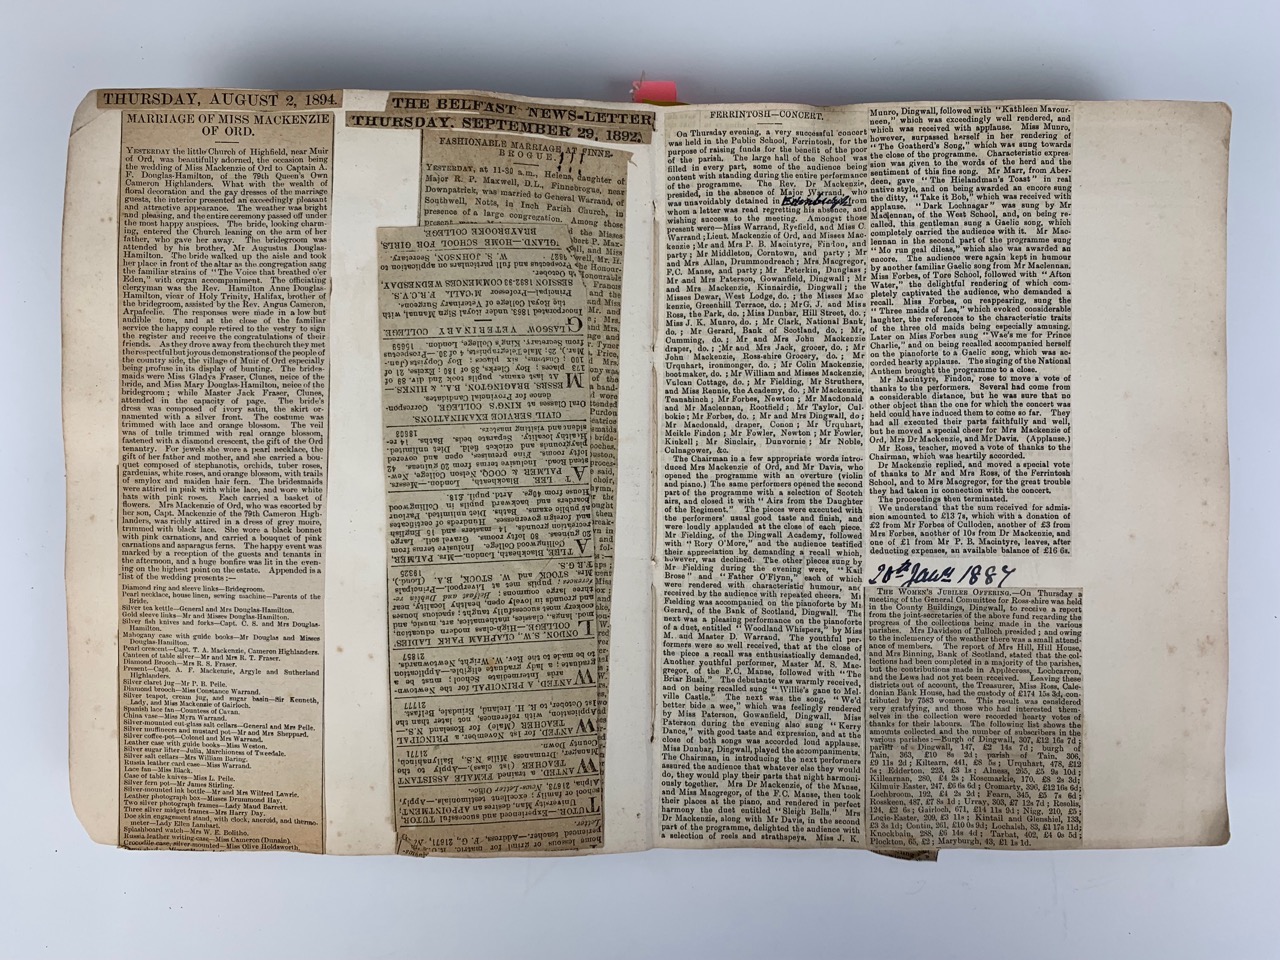 A late 19th Century scrap album containing numerous Highland Scottish newspaper cuttings and